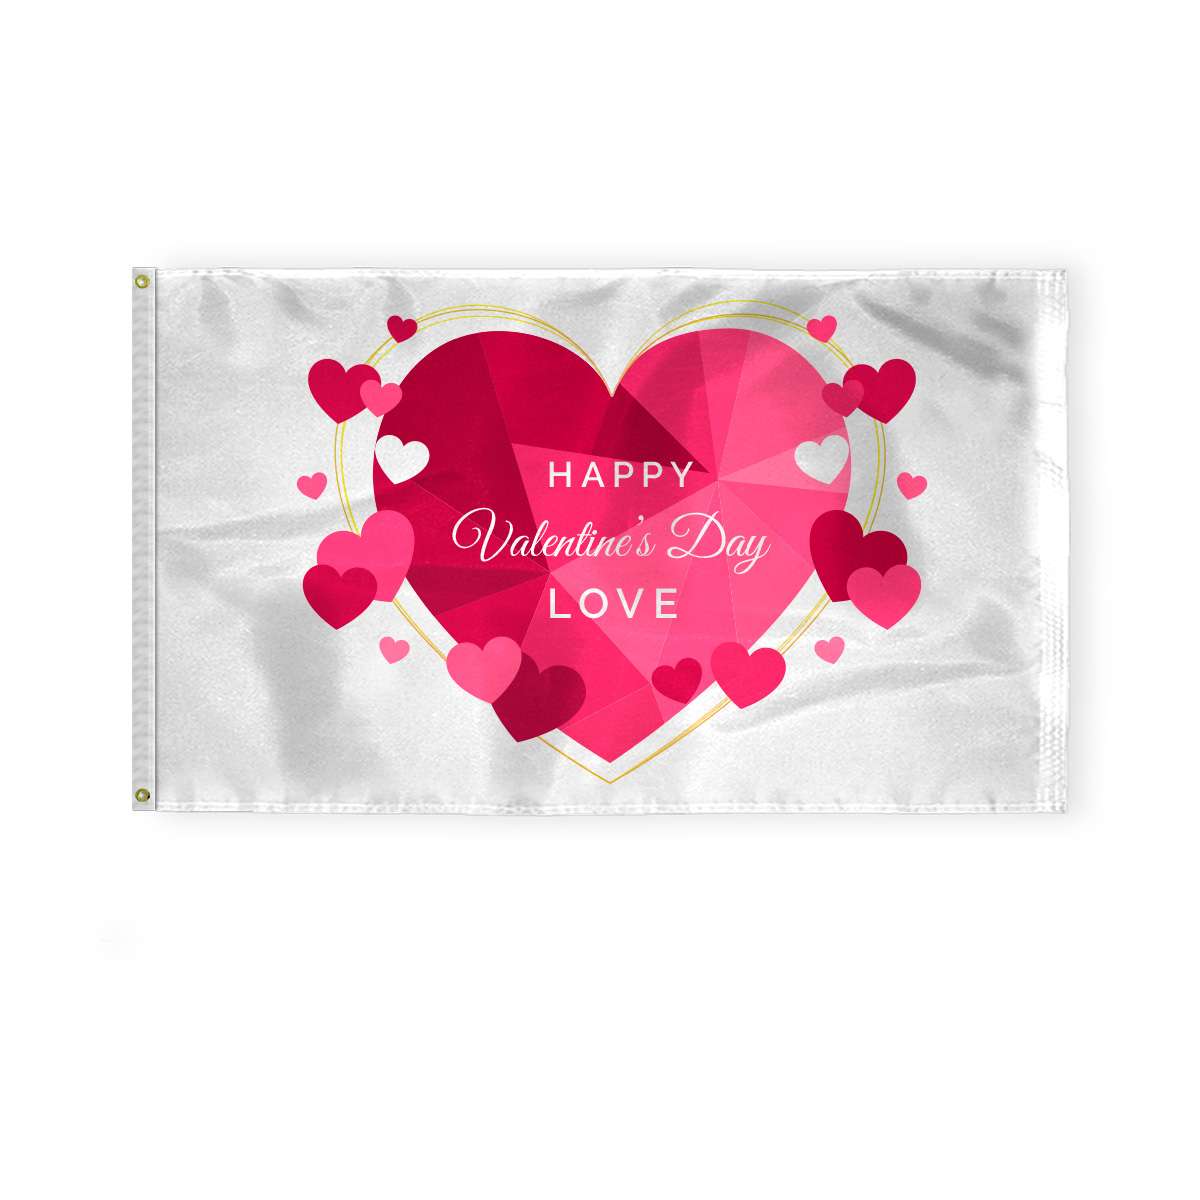 AGAS Valentine's Day Love Hearts Flag 3x5 Ft Outdoor Nylon